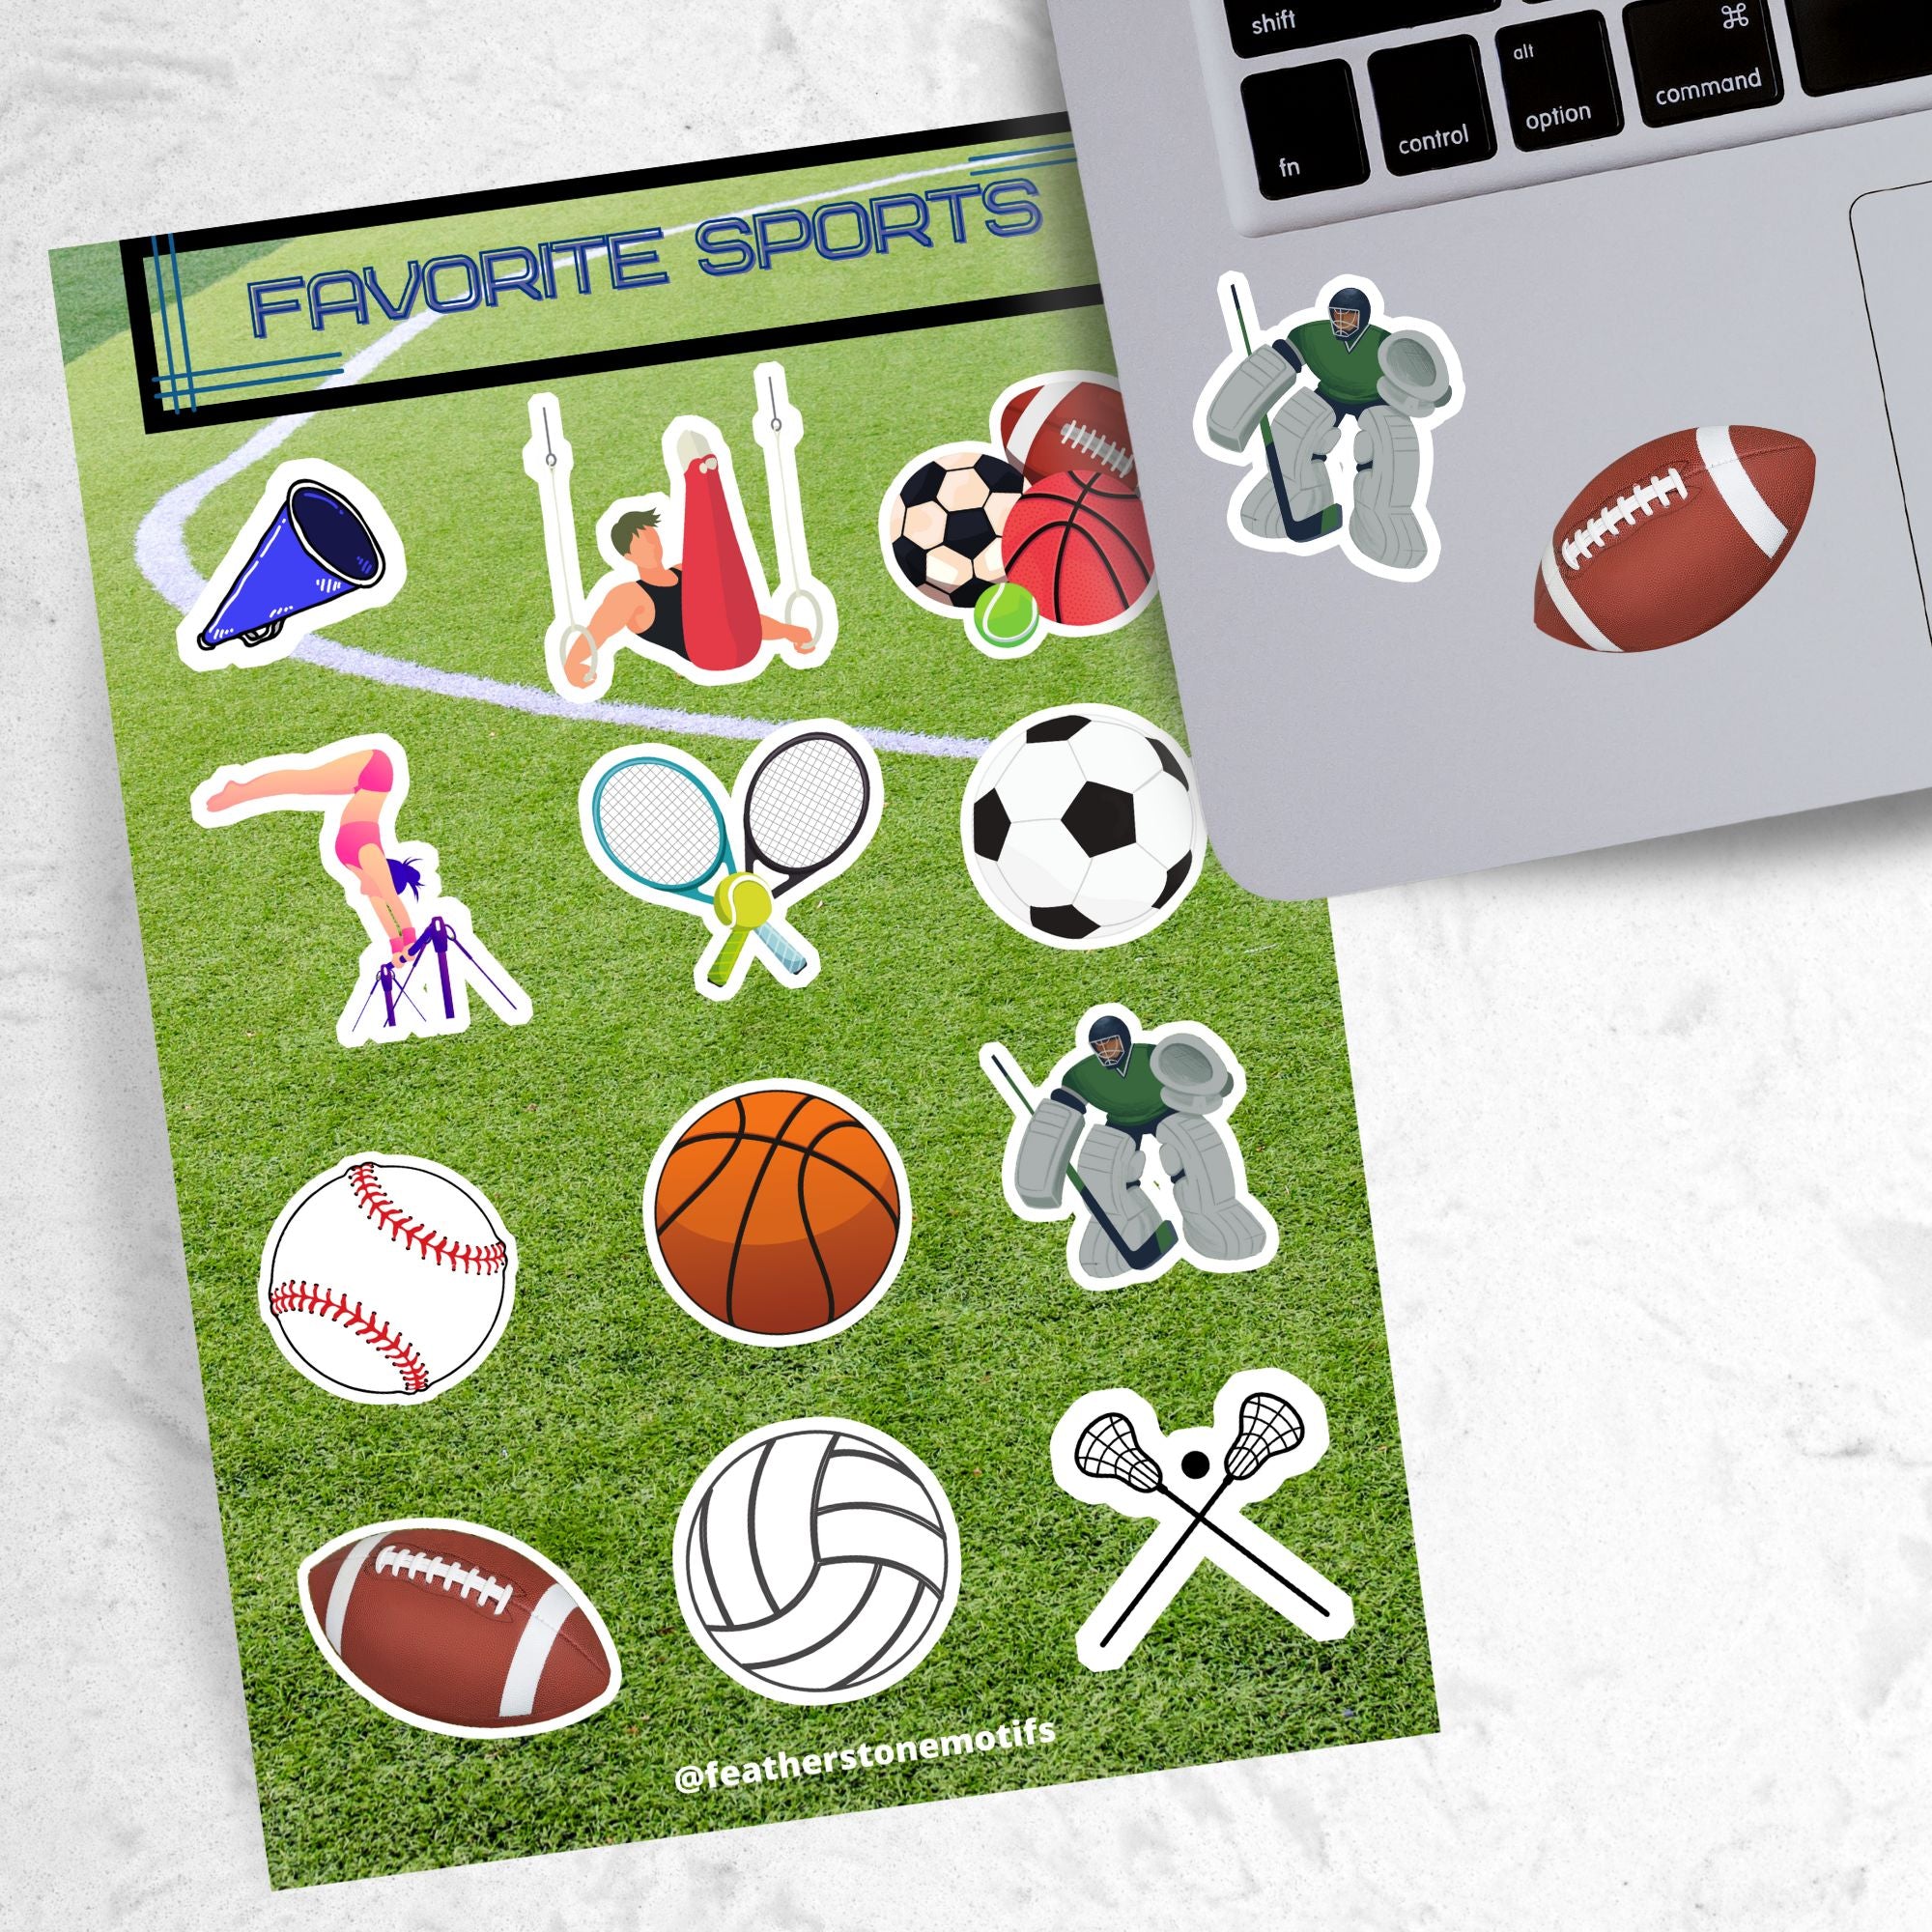 What are your favorite sports? Football, gymnastics, soccer, volleyball, cheer, baseball, hockey, tennis, or lacrosse? If you love any of these then this sticker sheet is perfect for you!  This image shows the Favorite Sports sticker sheet next to a laptop with hockey goalie and football stickers applied below the keyboard. 